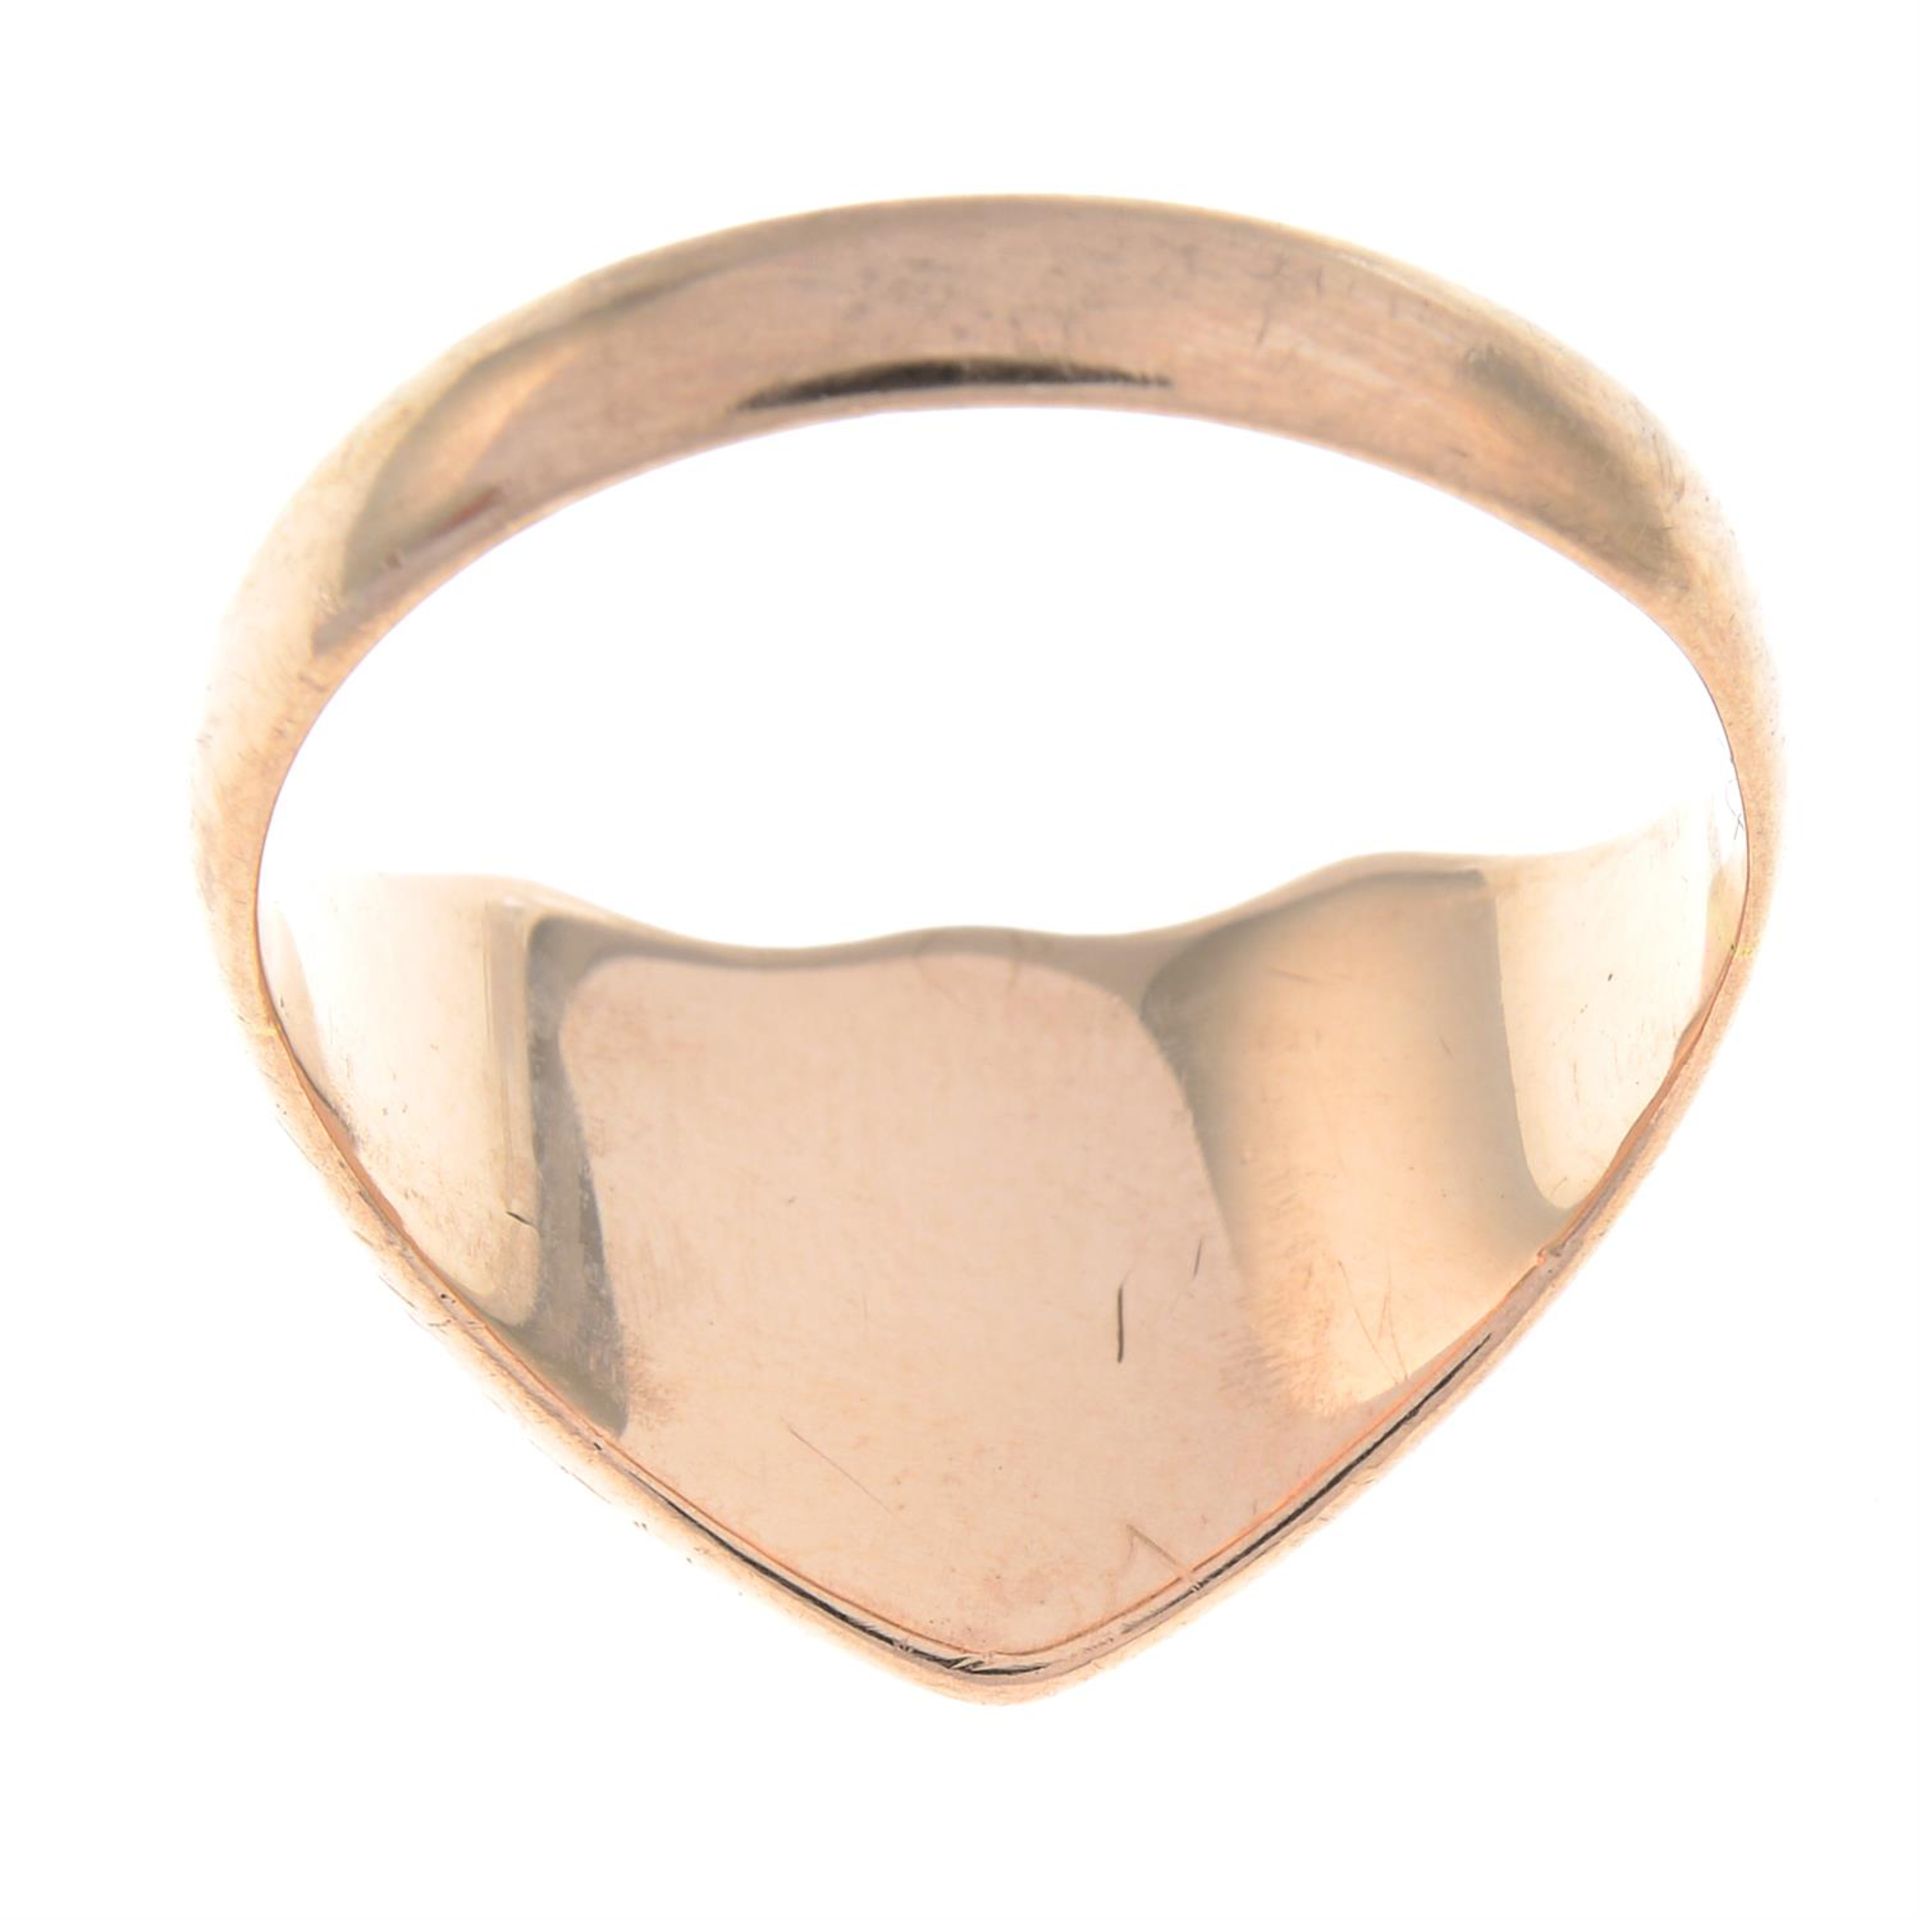 An early 20th century shield-shape signet ring, with scrolling sides. - Image 2 of 2